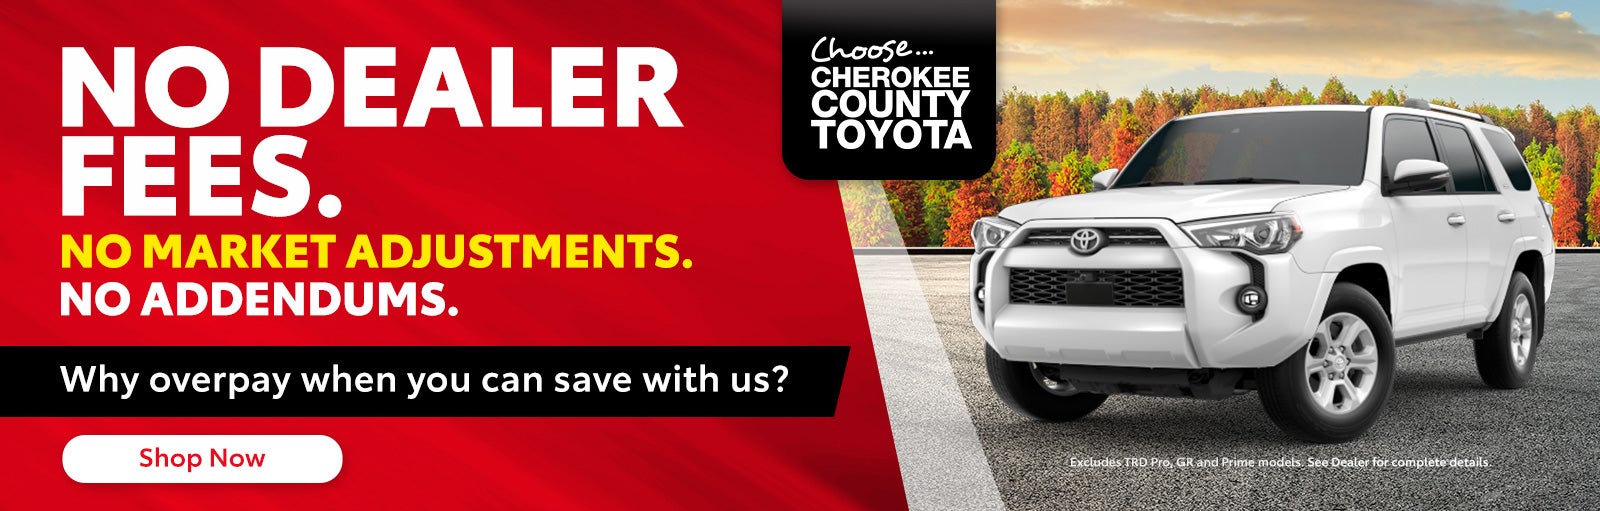 No Dealer Fees at Cherokee County Toyota